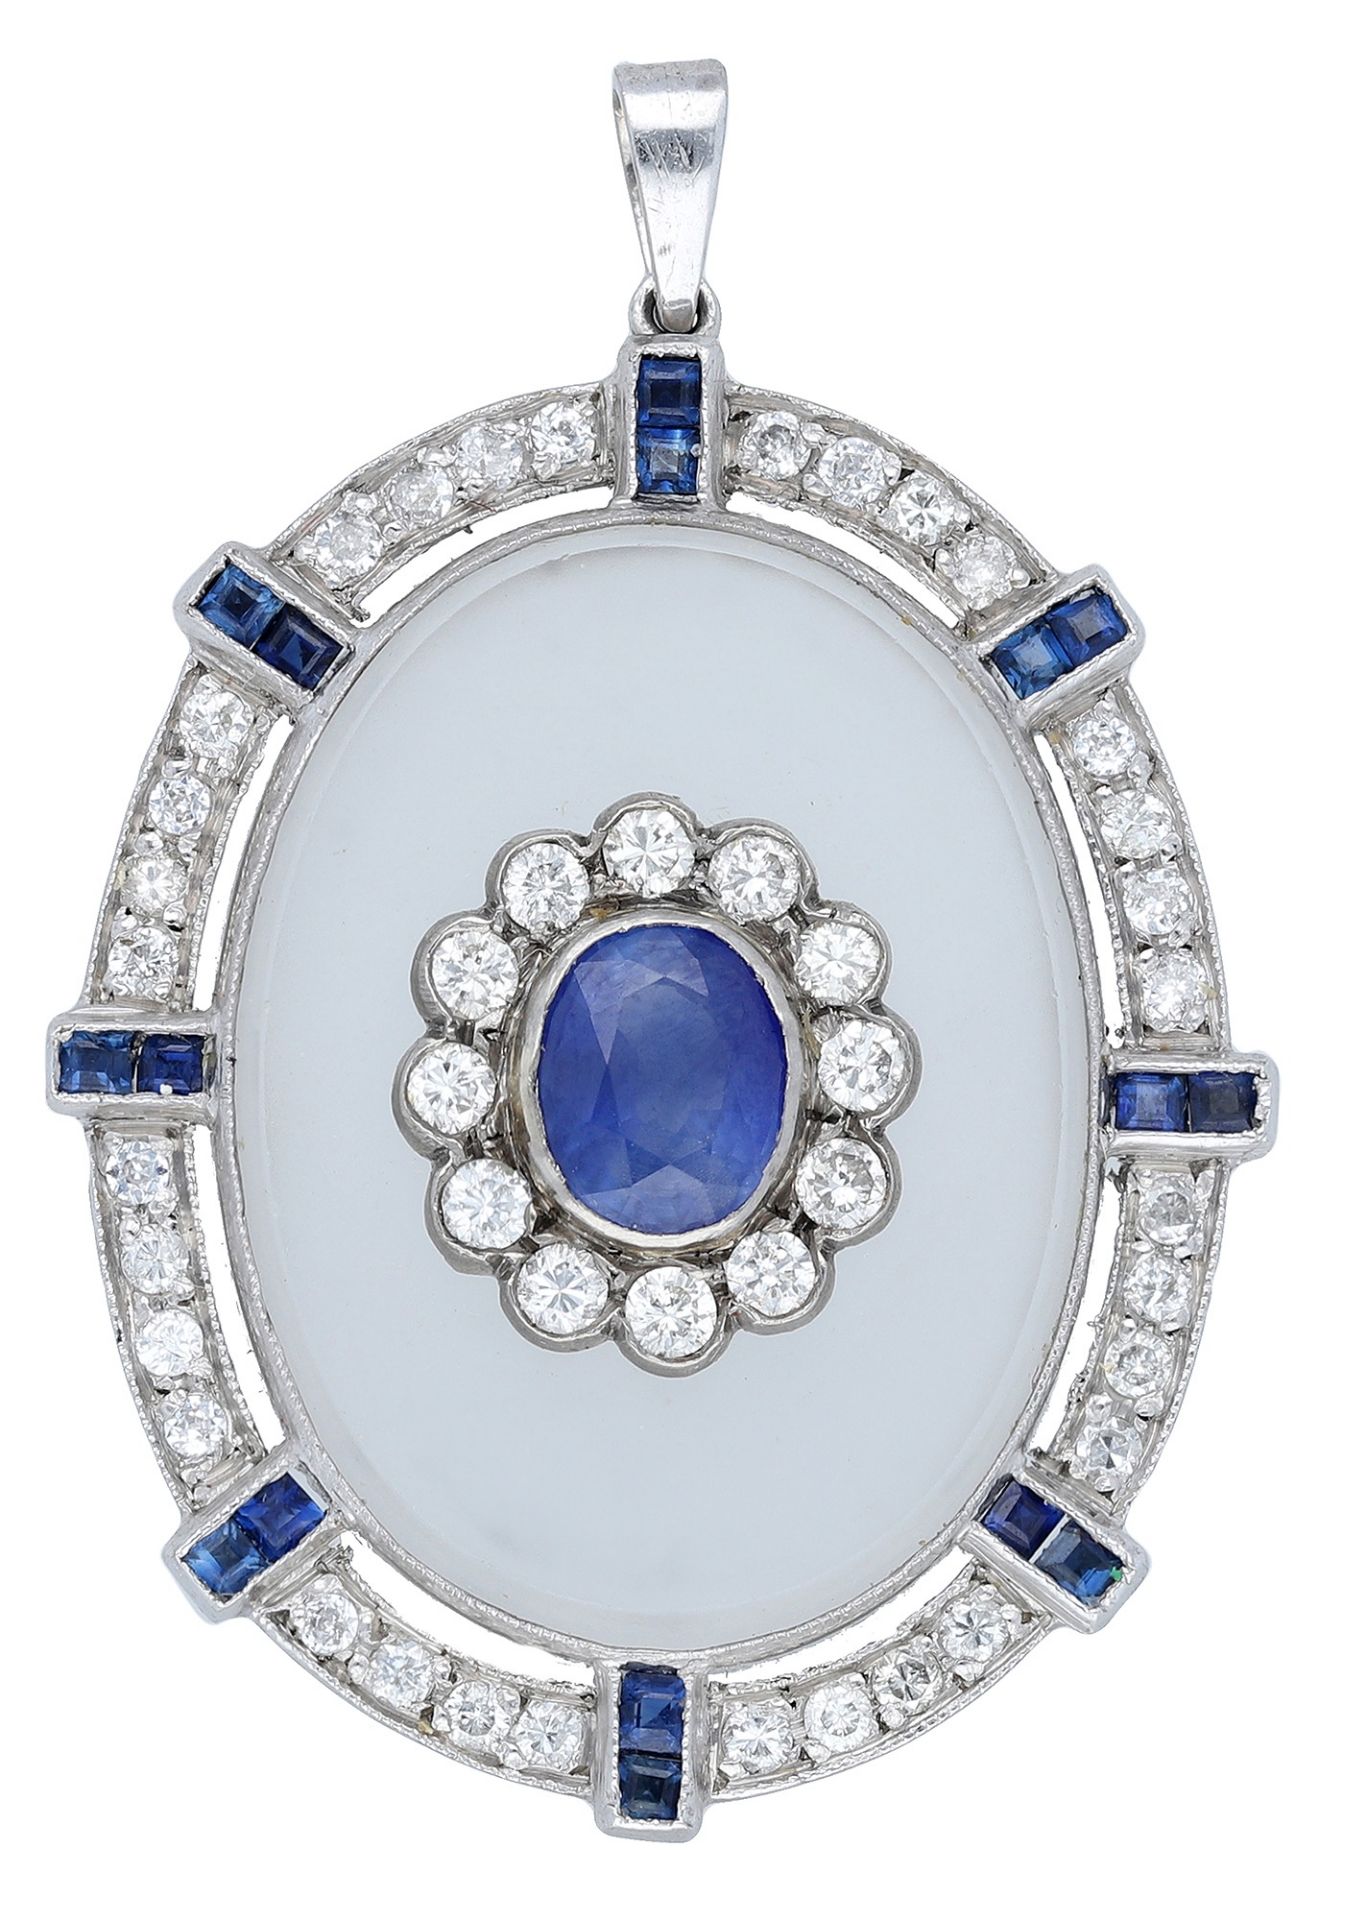 An Art Deco style gem-set pendant, the central sapphire and diamond cluster applied to a fro...